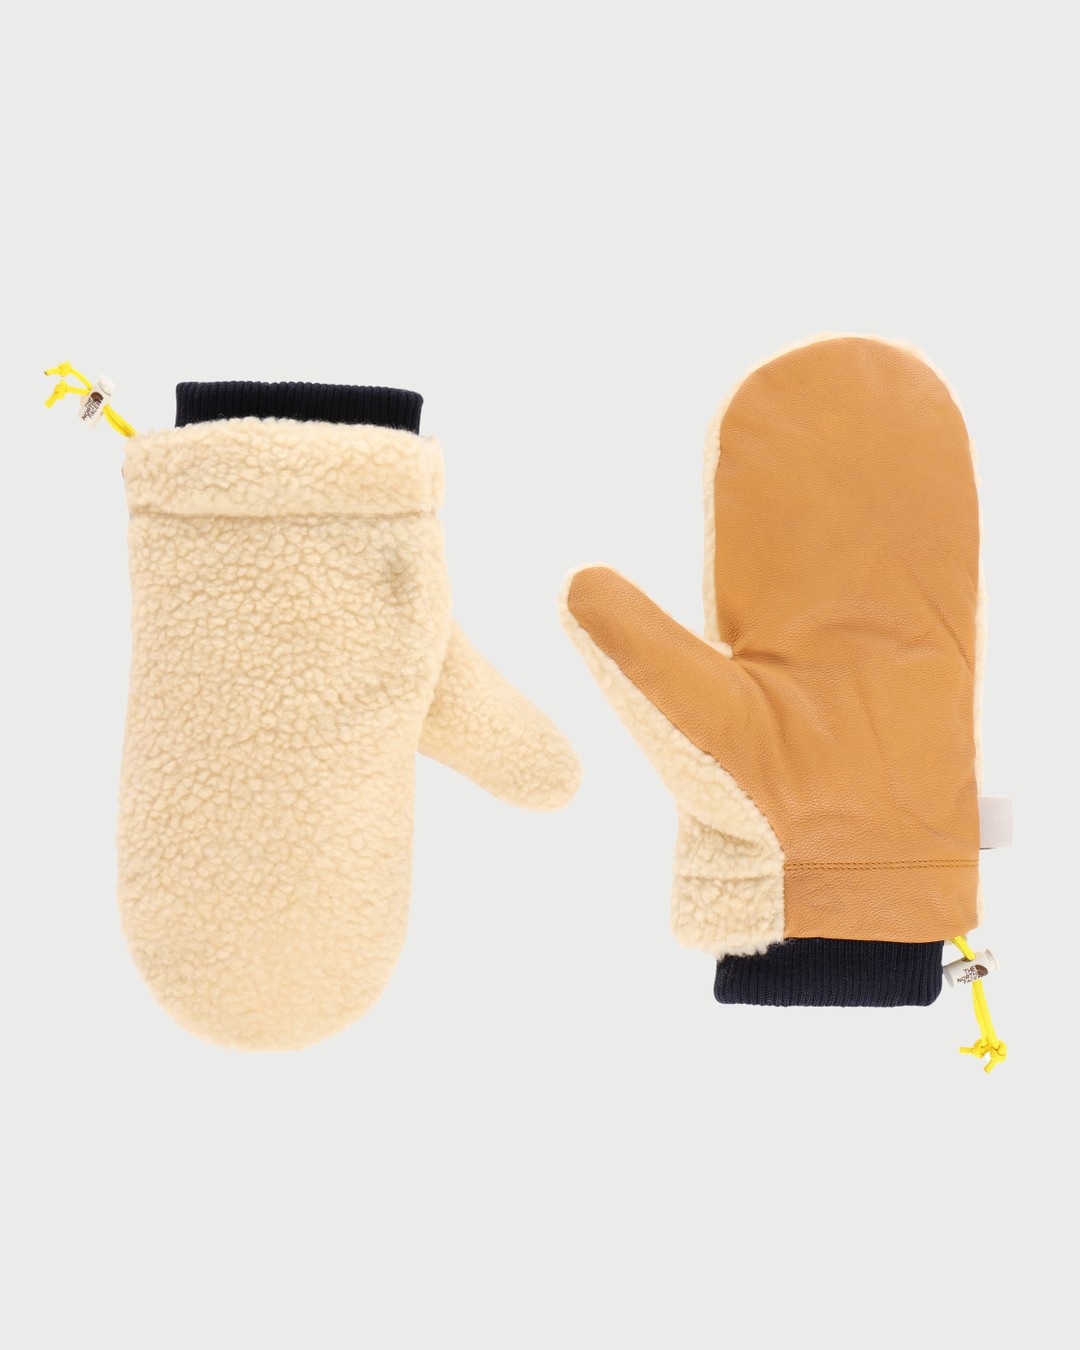 The North Face – Brown Label Knit Gloves Bleached Sand Unisex - 5-Finger - Yellow - Image 1